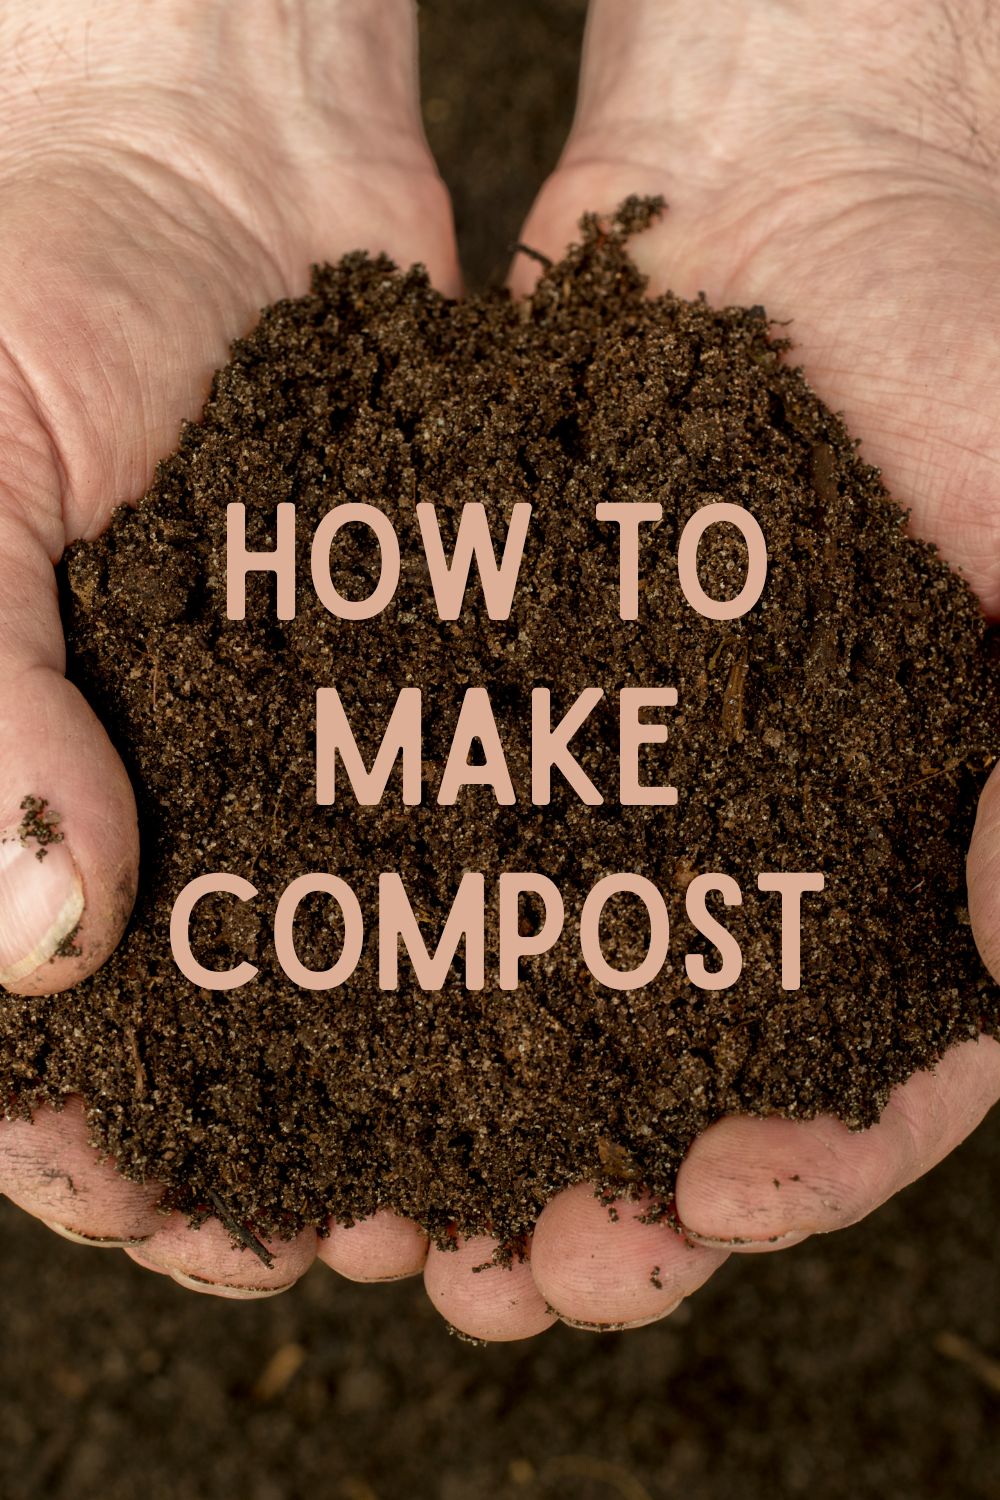 How to make compost.